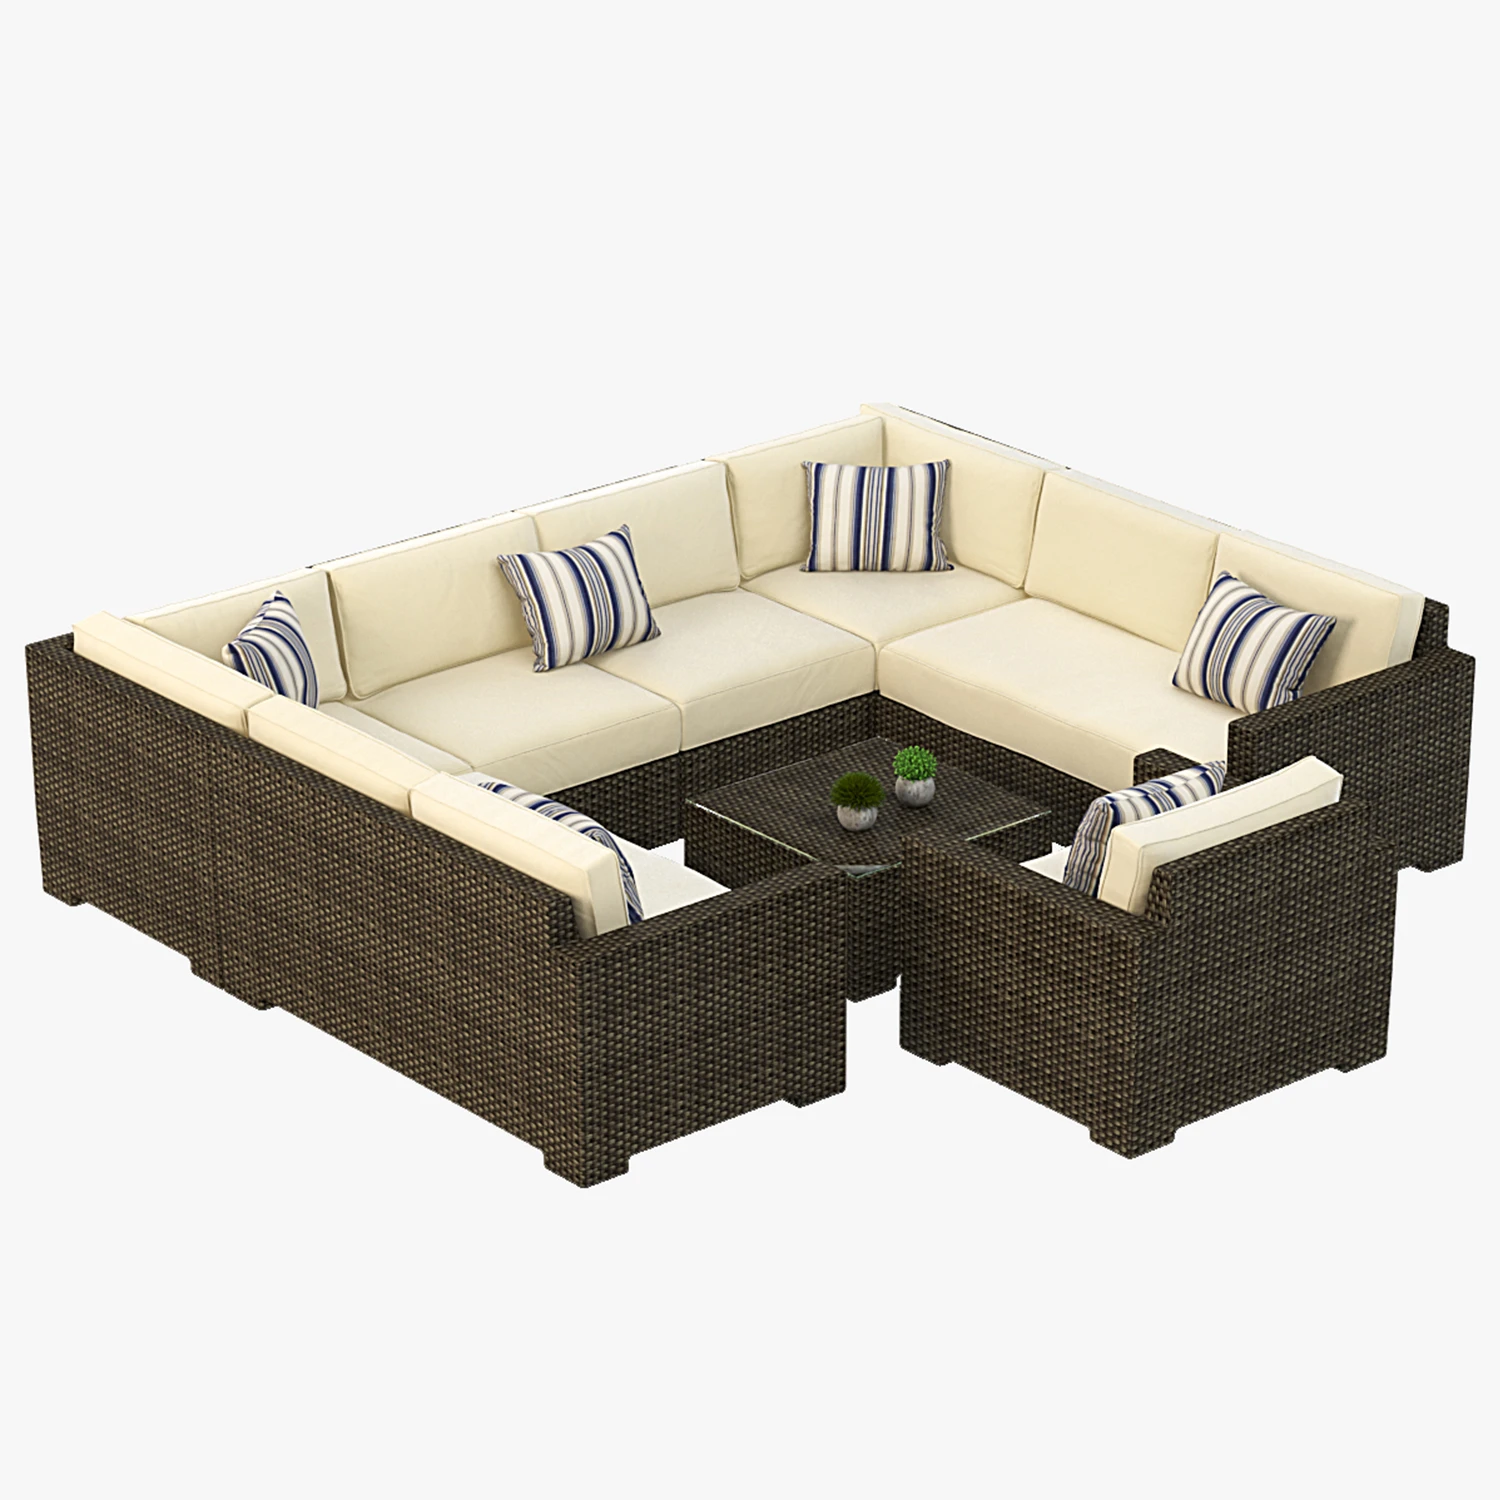 Crate and Barrel Sofa Collection 01 3D Model_09